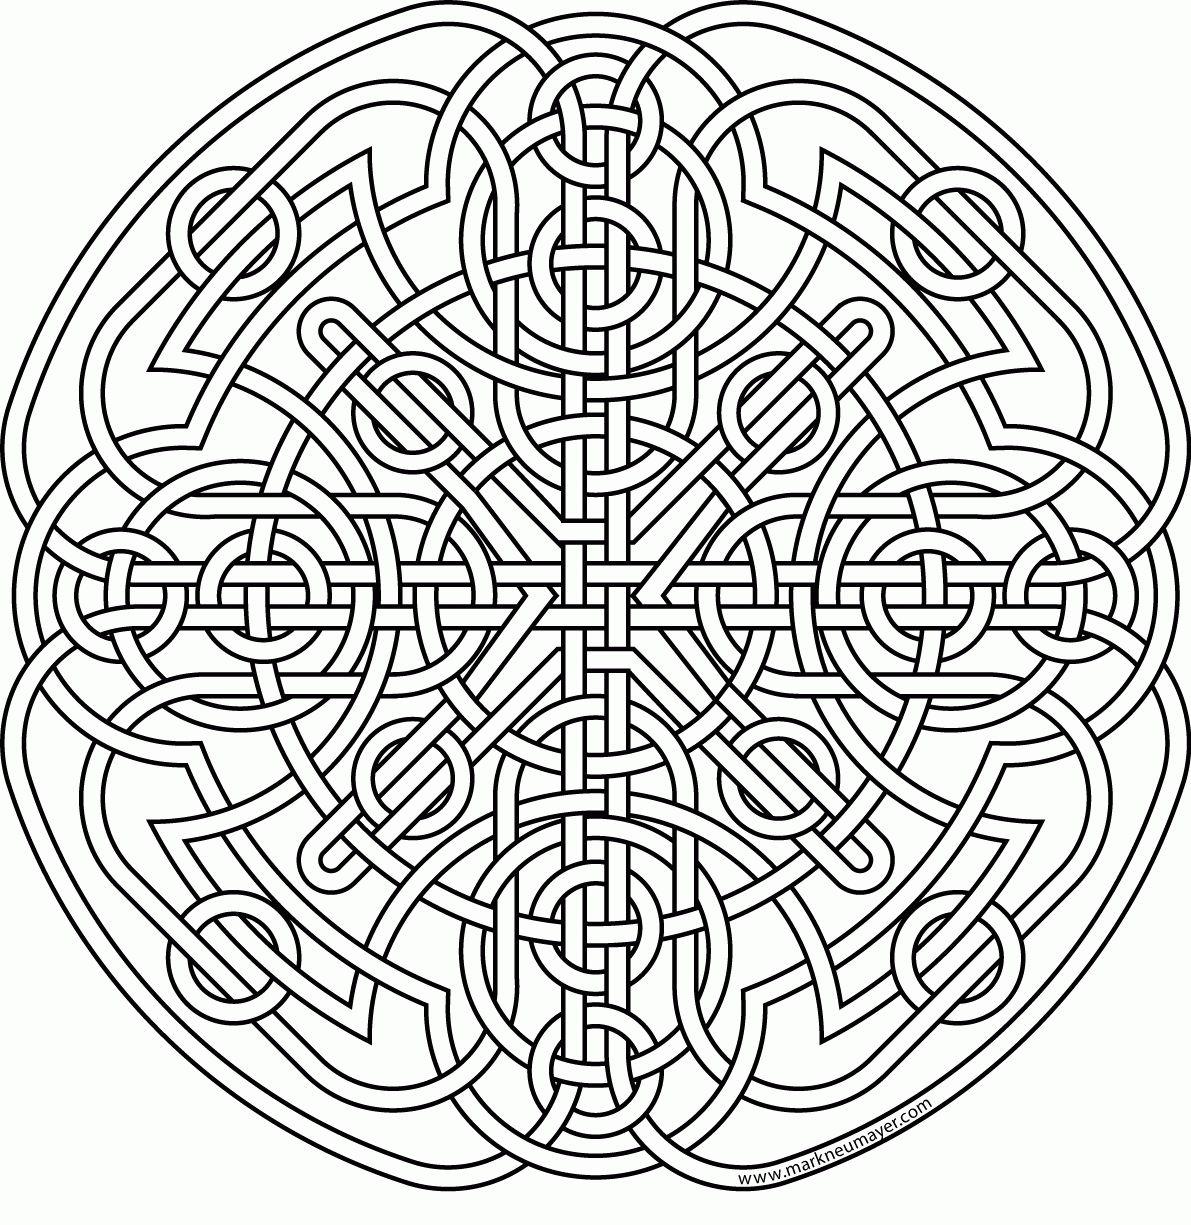 12 Pics of Celtic Knotwork Patterns Coloring Pages - Celtic Knot ...